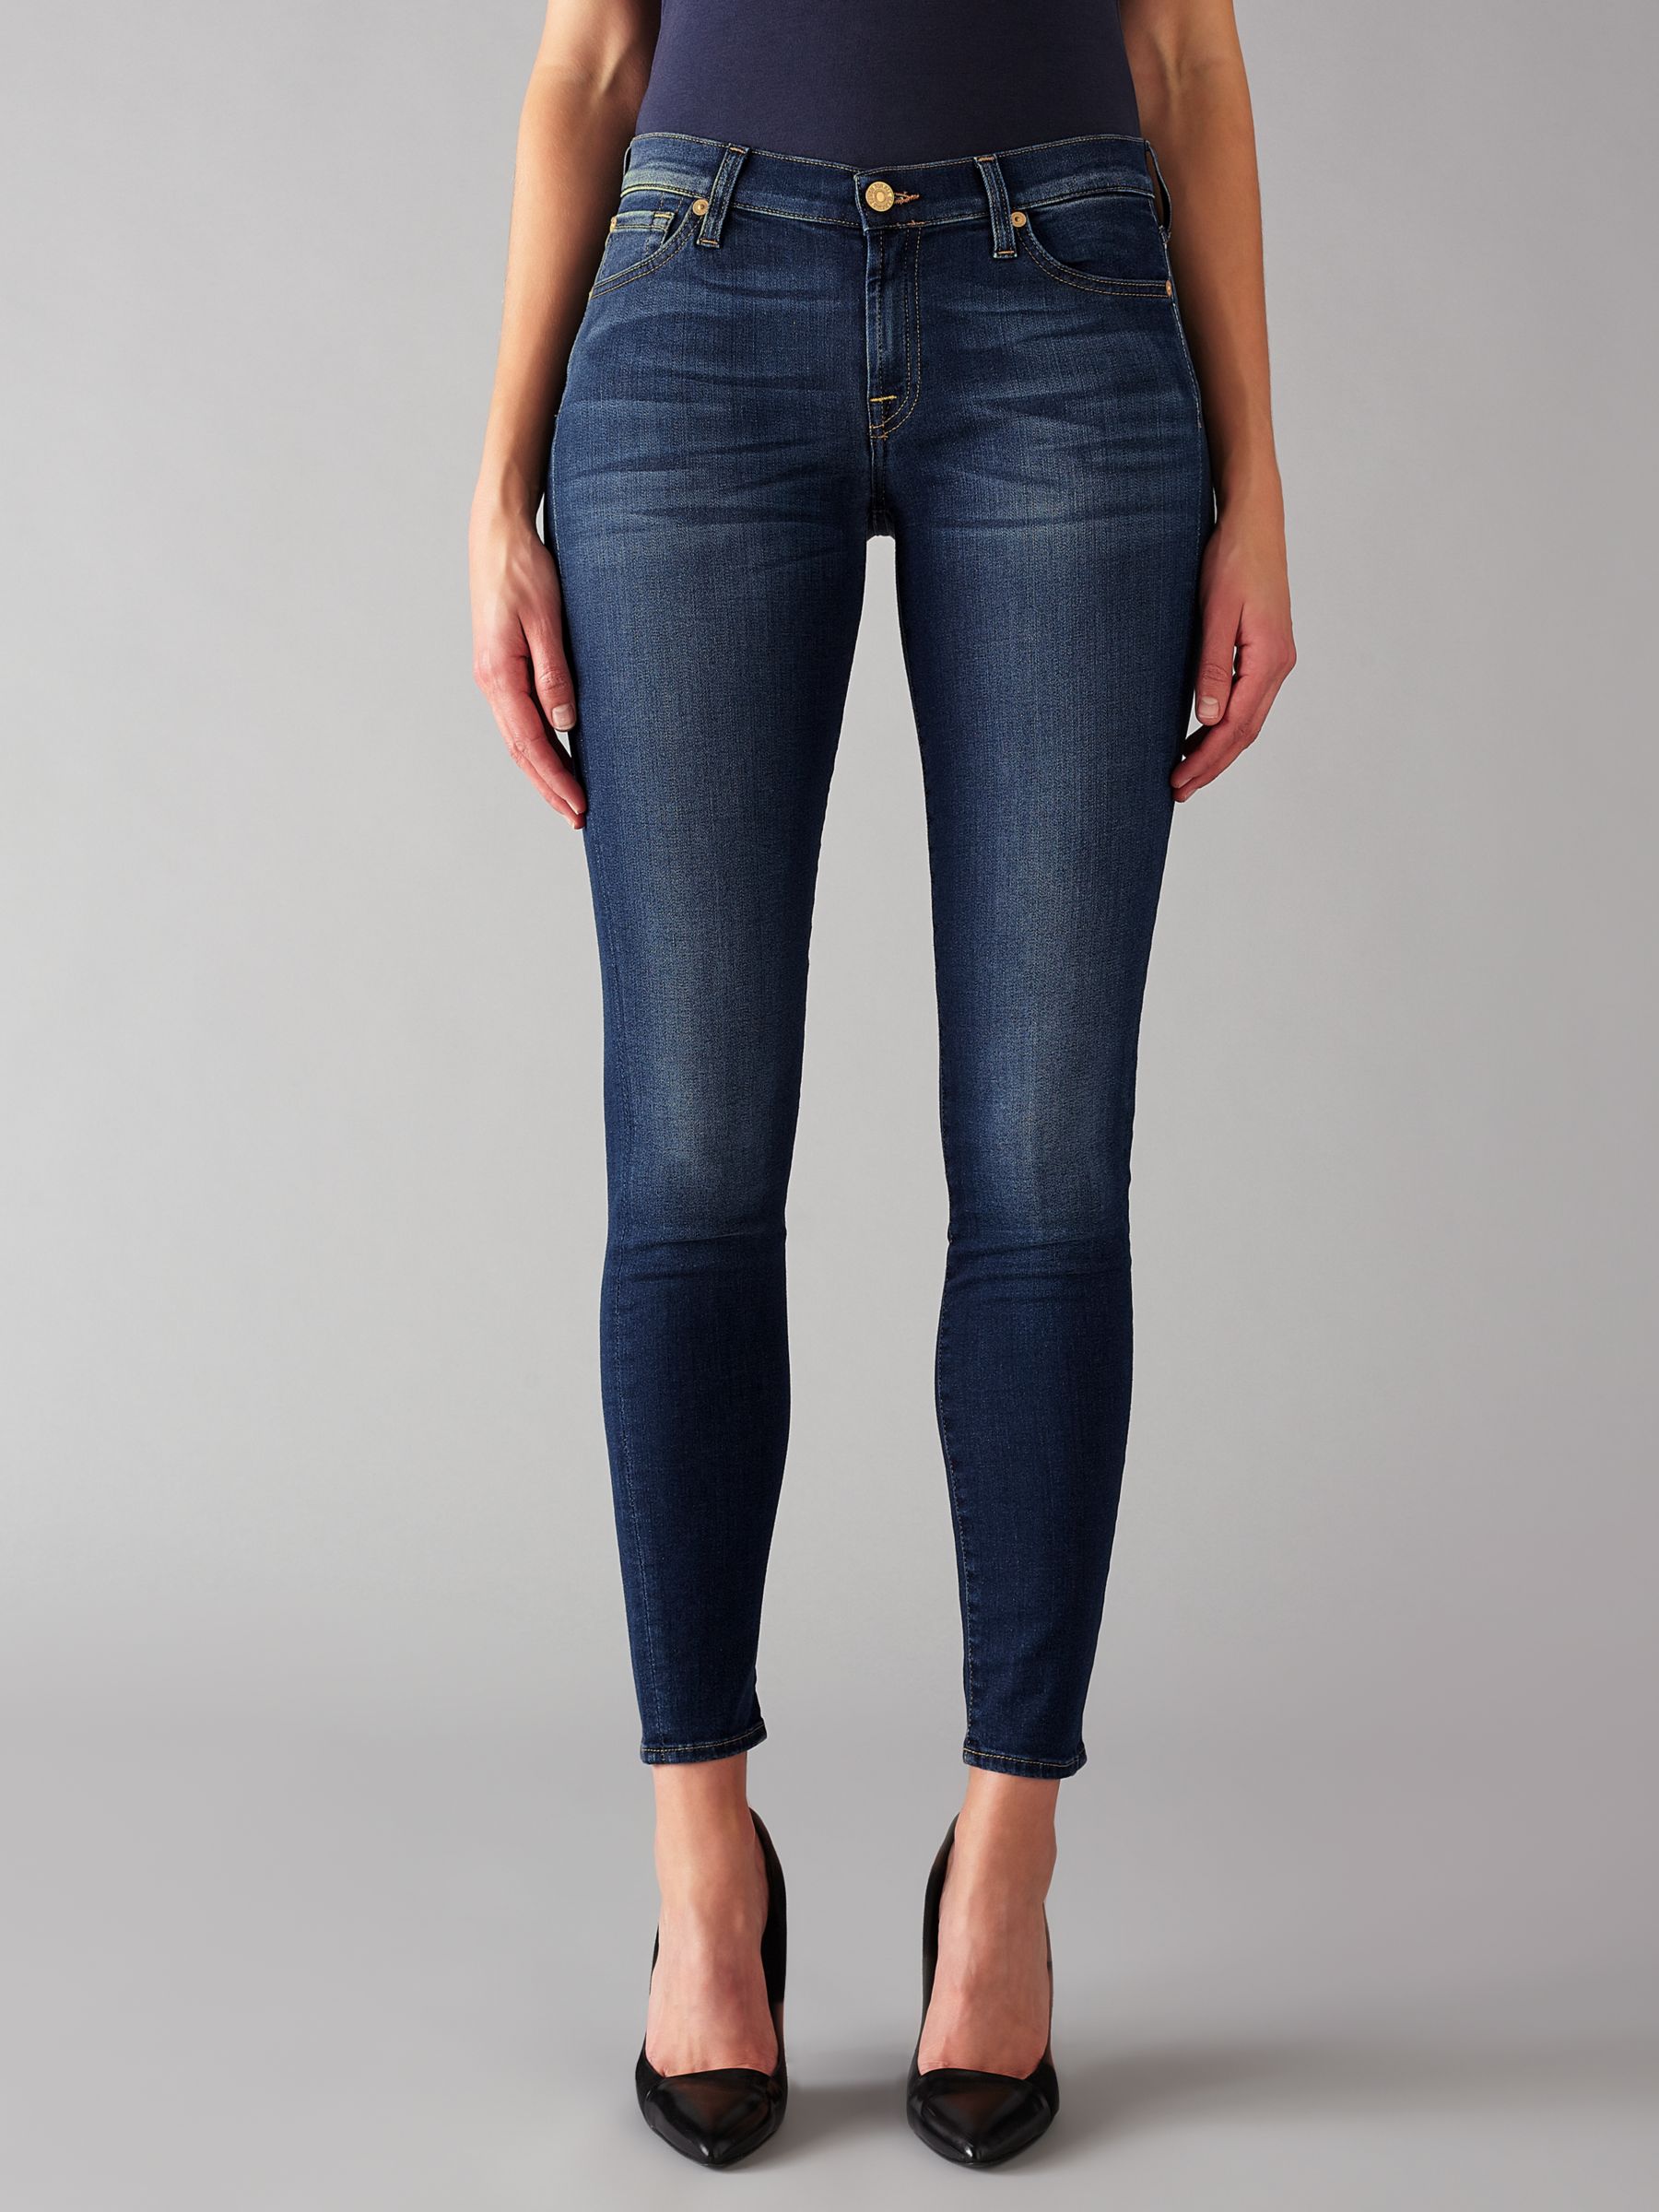 seven 4 all mankind jeans